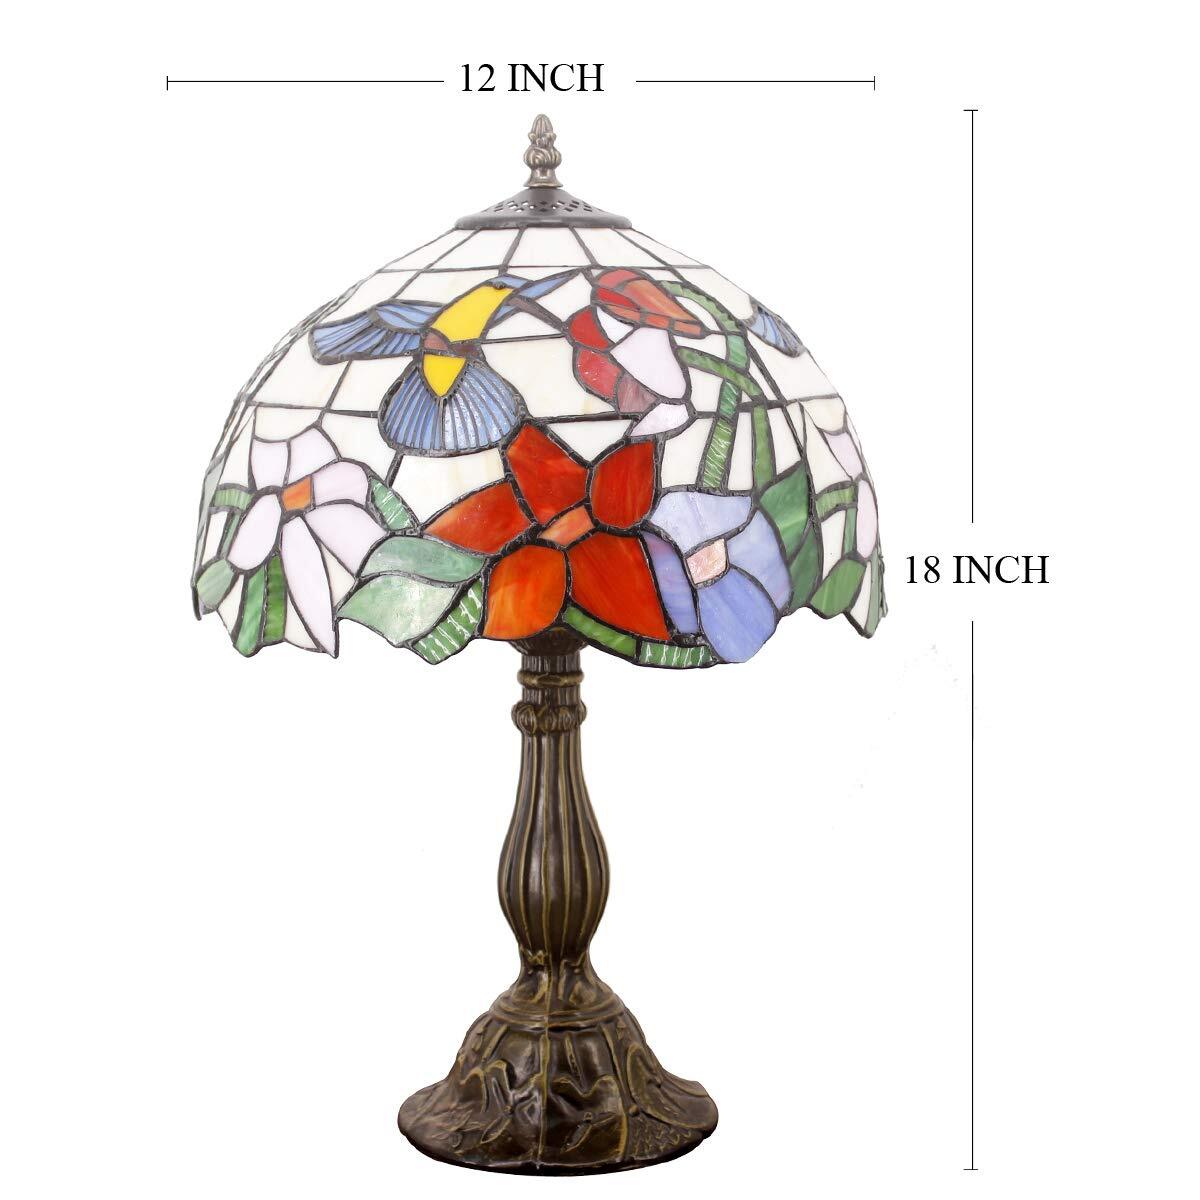 Stained Glass Lamp, Hummingbird Style Bedside Lamp Reading Light 12 x 12 x 18 Inch Decor for Bedroom Living Room Home Office